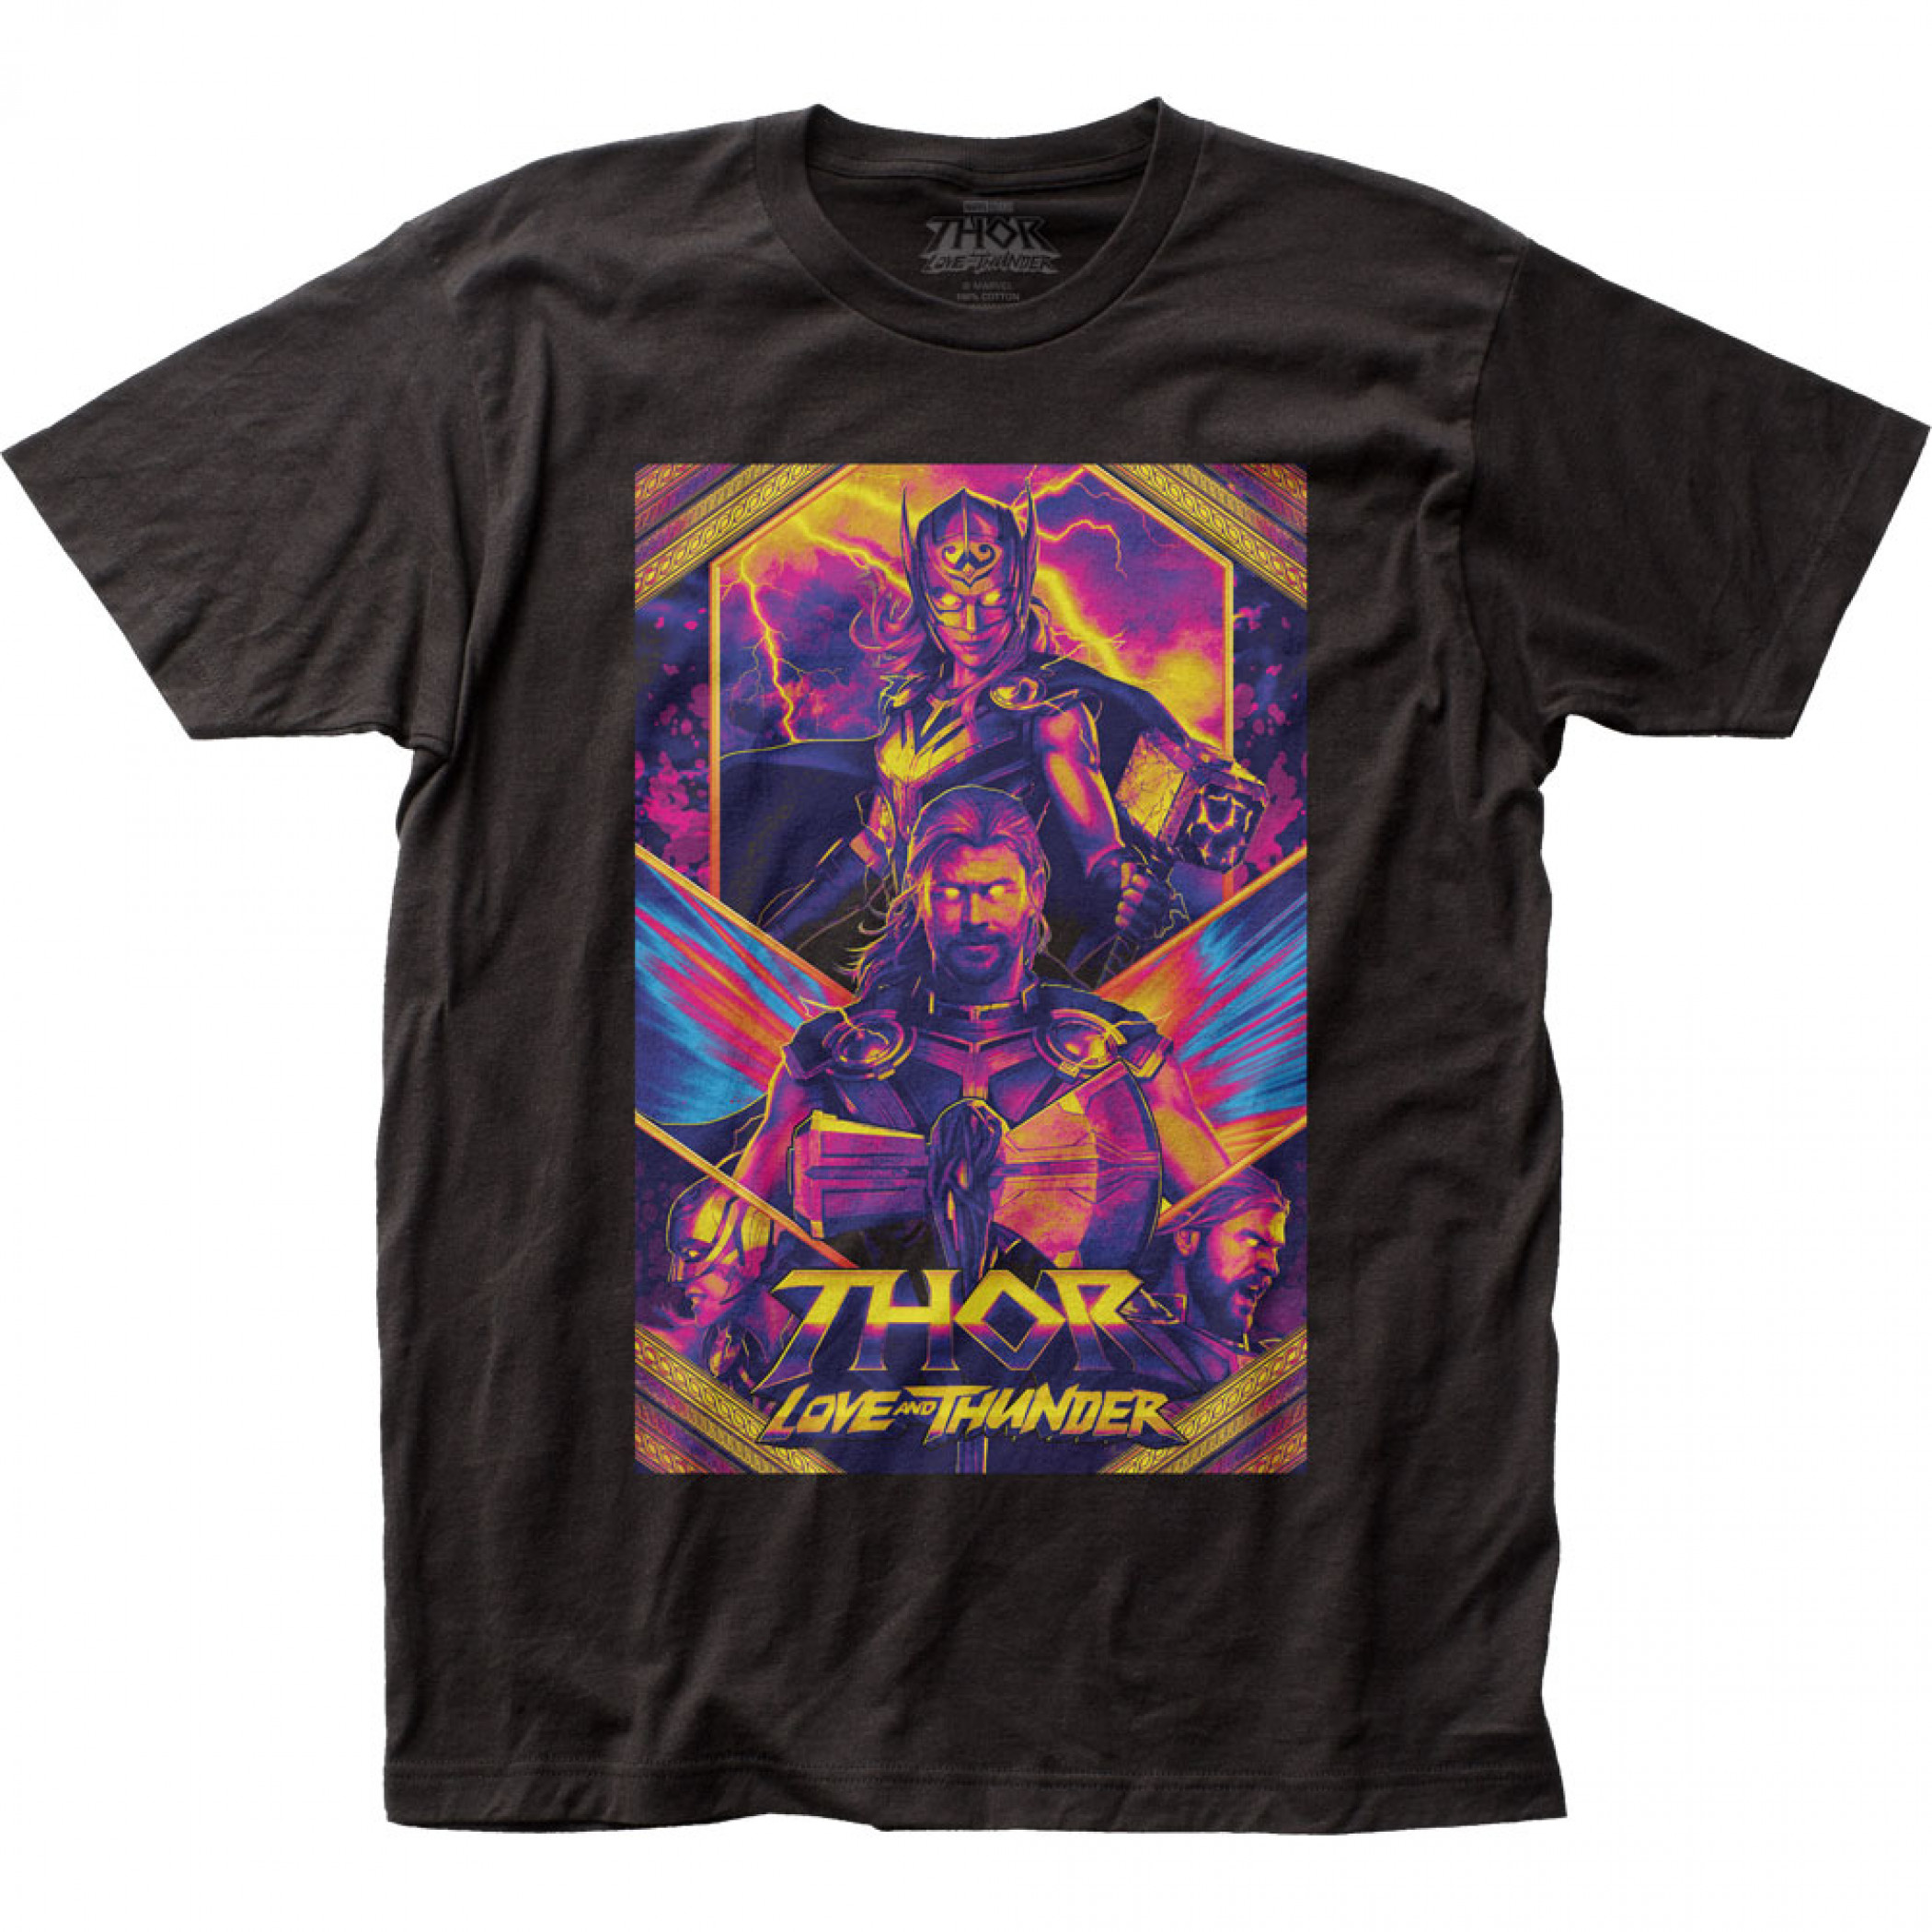 Thor Love and Thunder The Mighty Thor and Jane Foster Poster T-Shirt